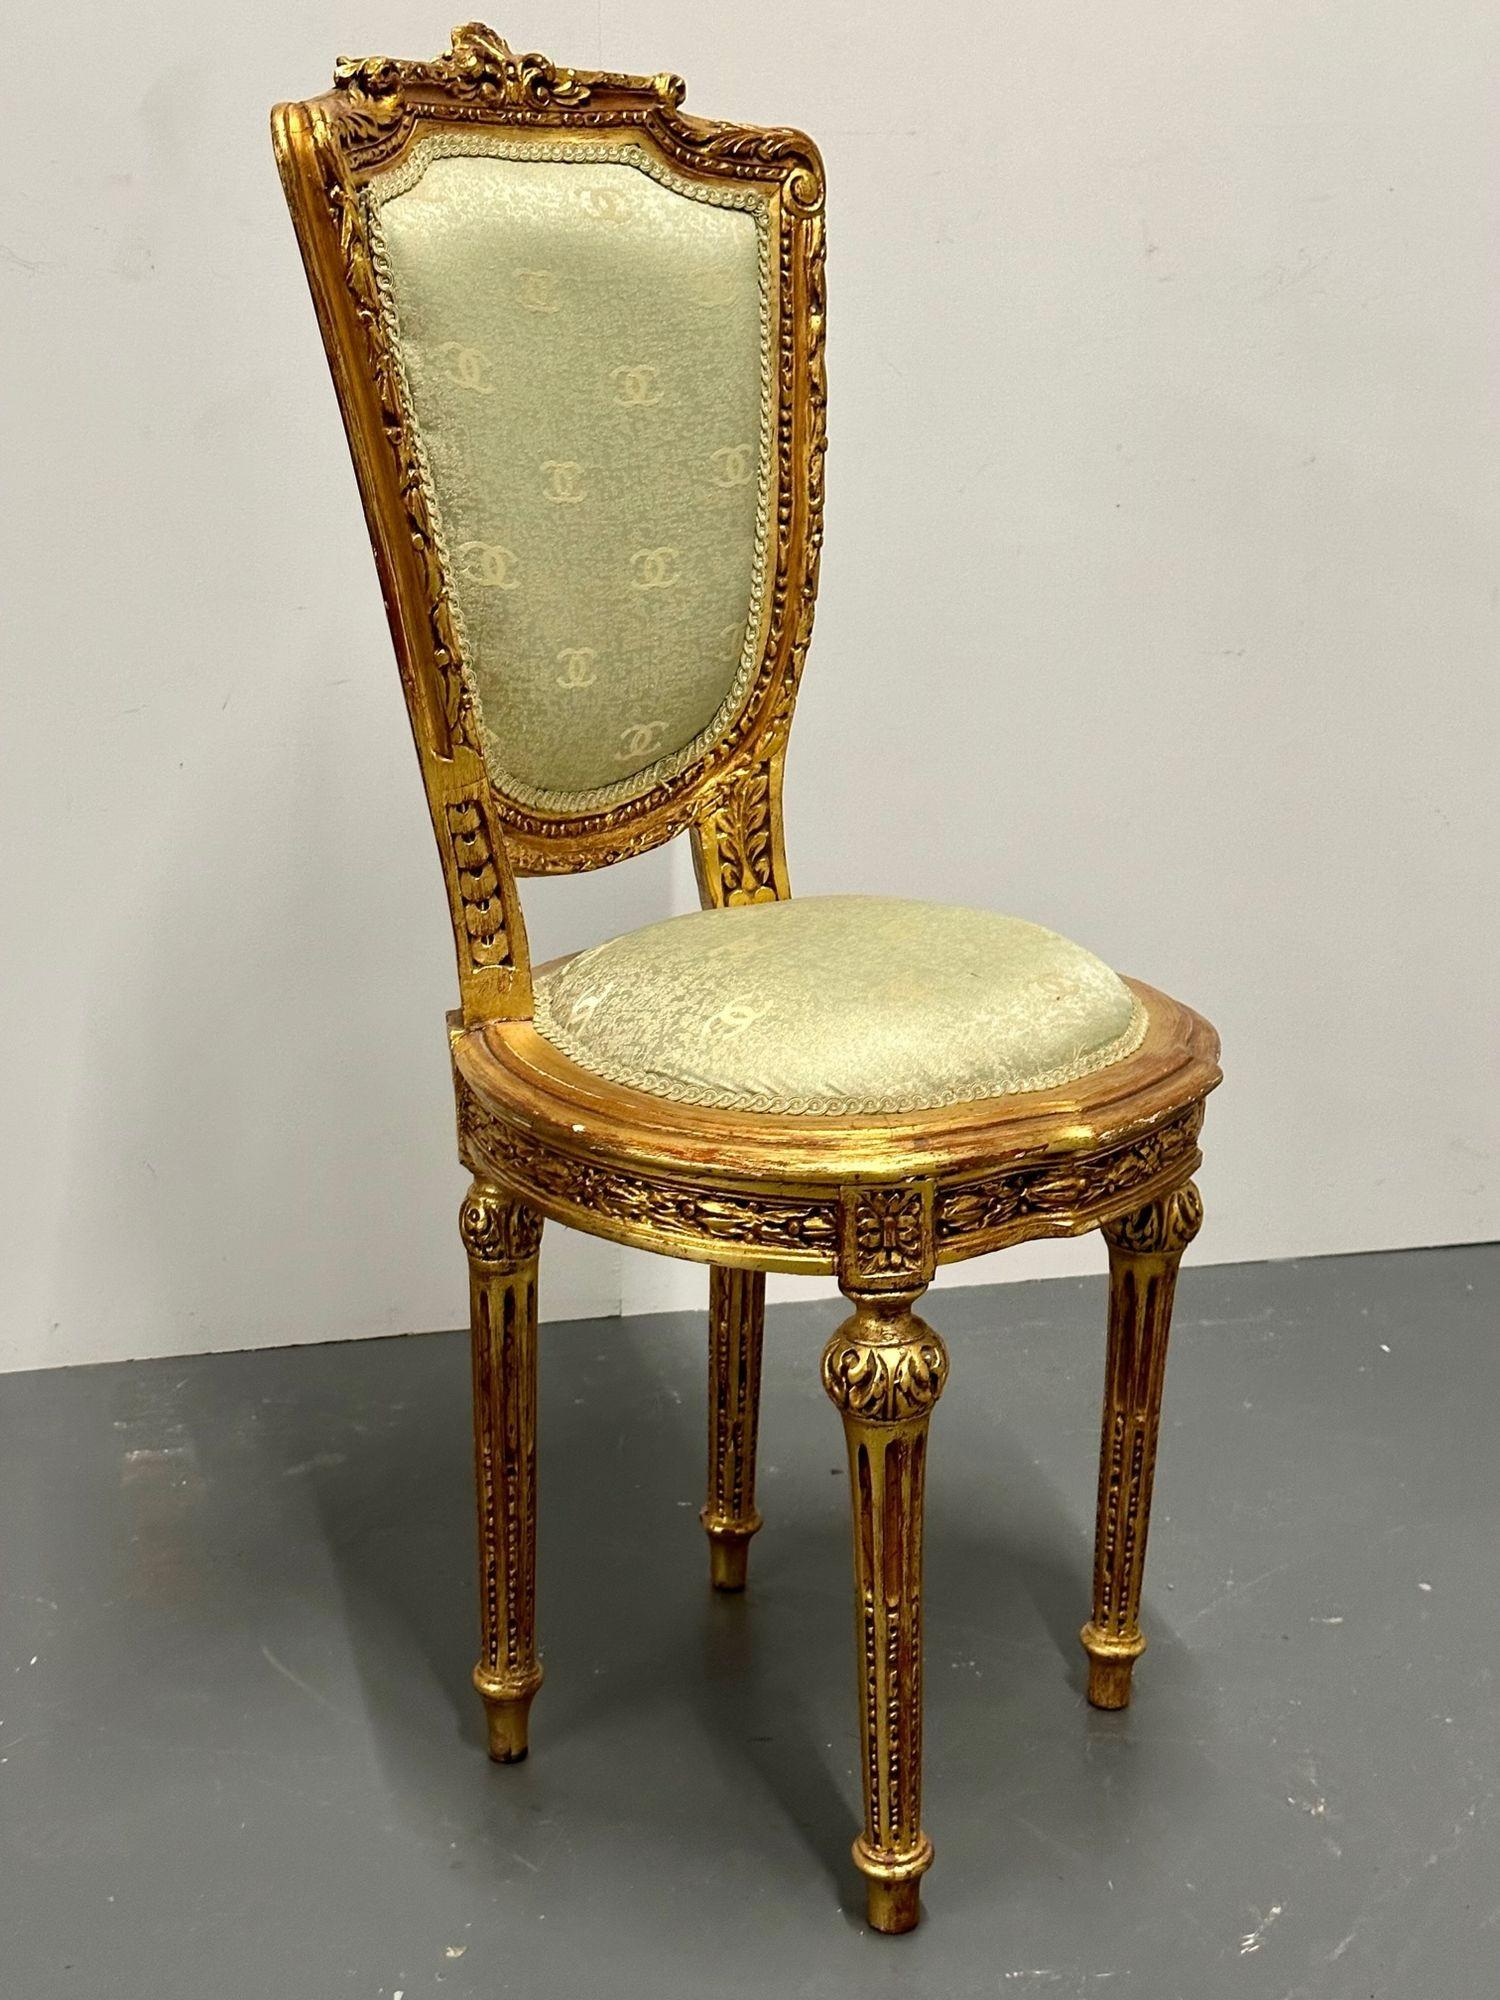 Louis XVI Style Giltwood hand carved side / accent chair, Chanel Fabric, 19th C.
 
Chic accent chair with later green Chanel embroidered fabric. The frame of the chair is intricately hand carved having a clayed gilt finish, giving the entirety of